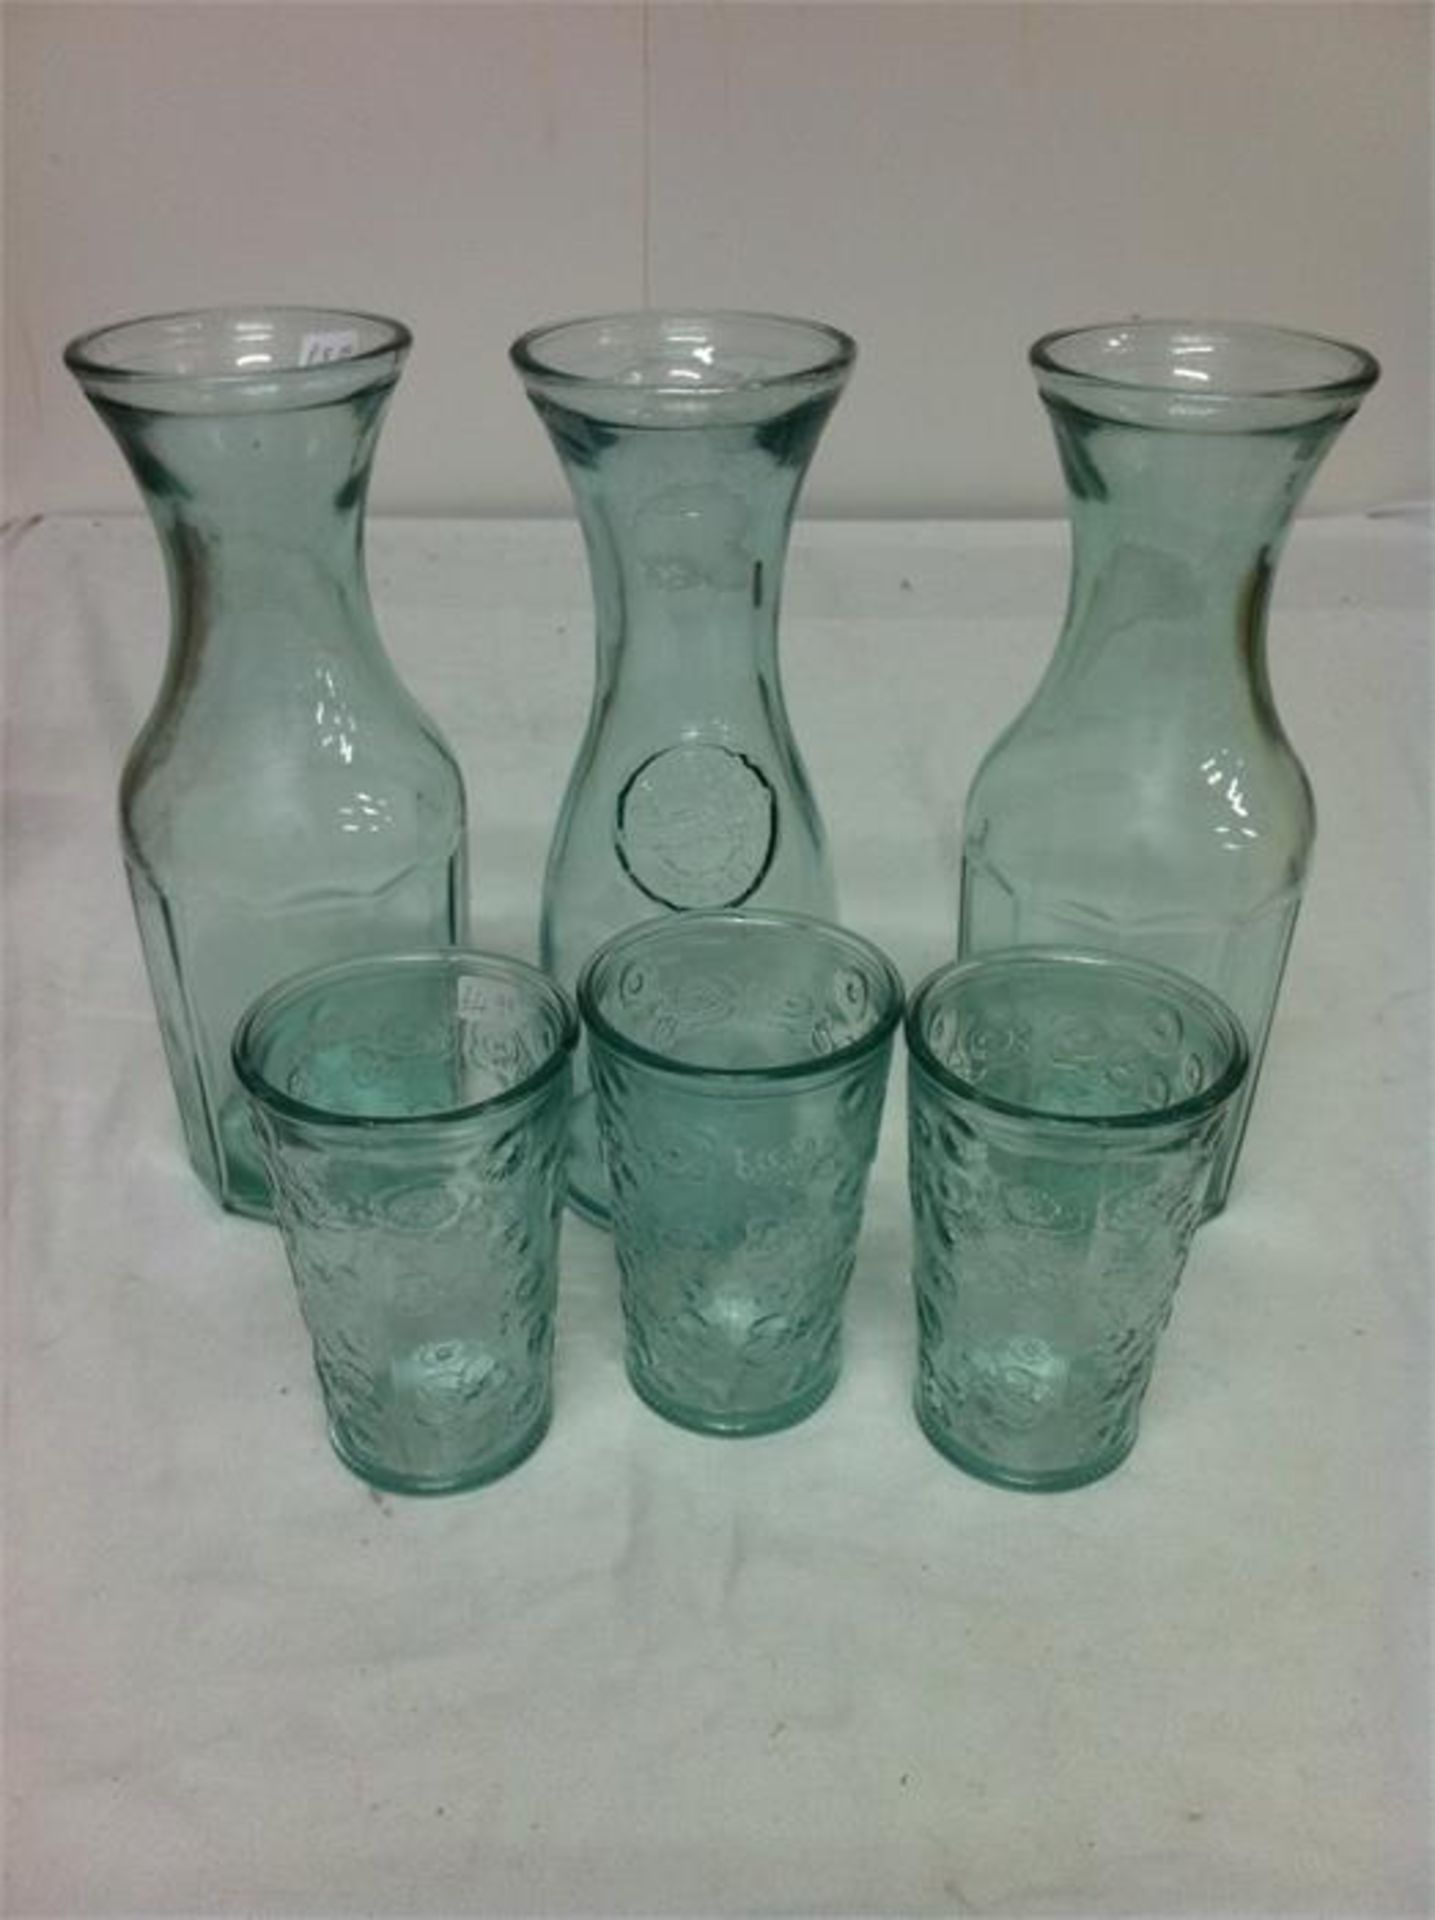 Quantity of 100% recycled glassware; 5 carafes/3 bottles with ceramic tops/4 storage jars/3 candle v - Image 3 of 3